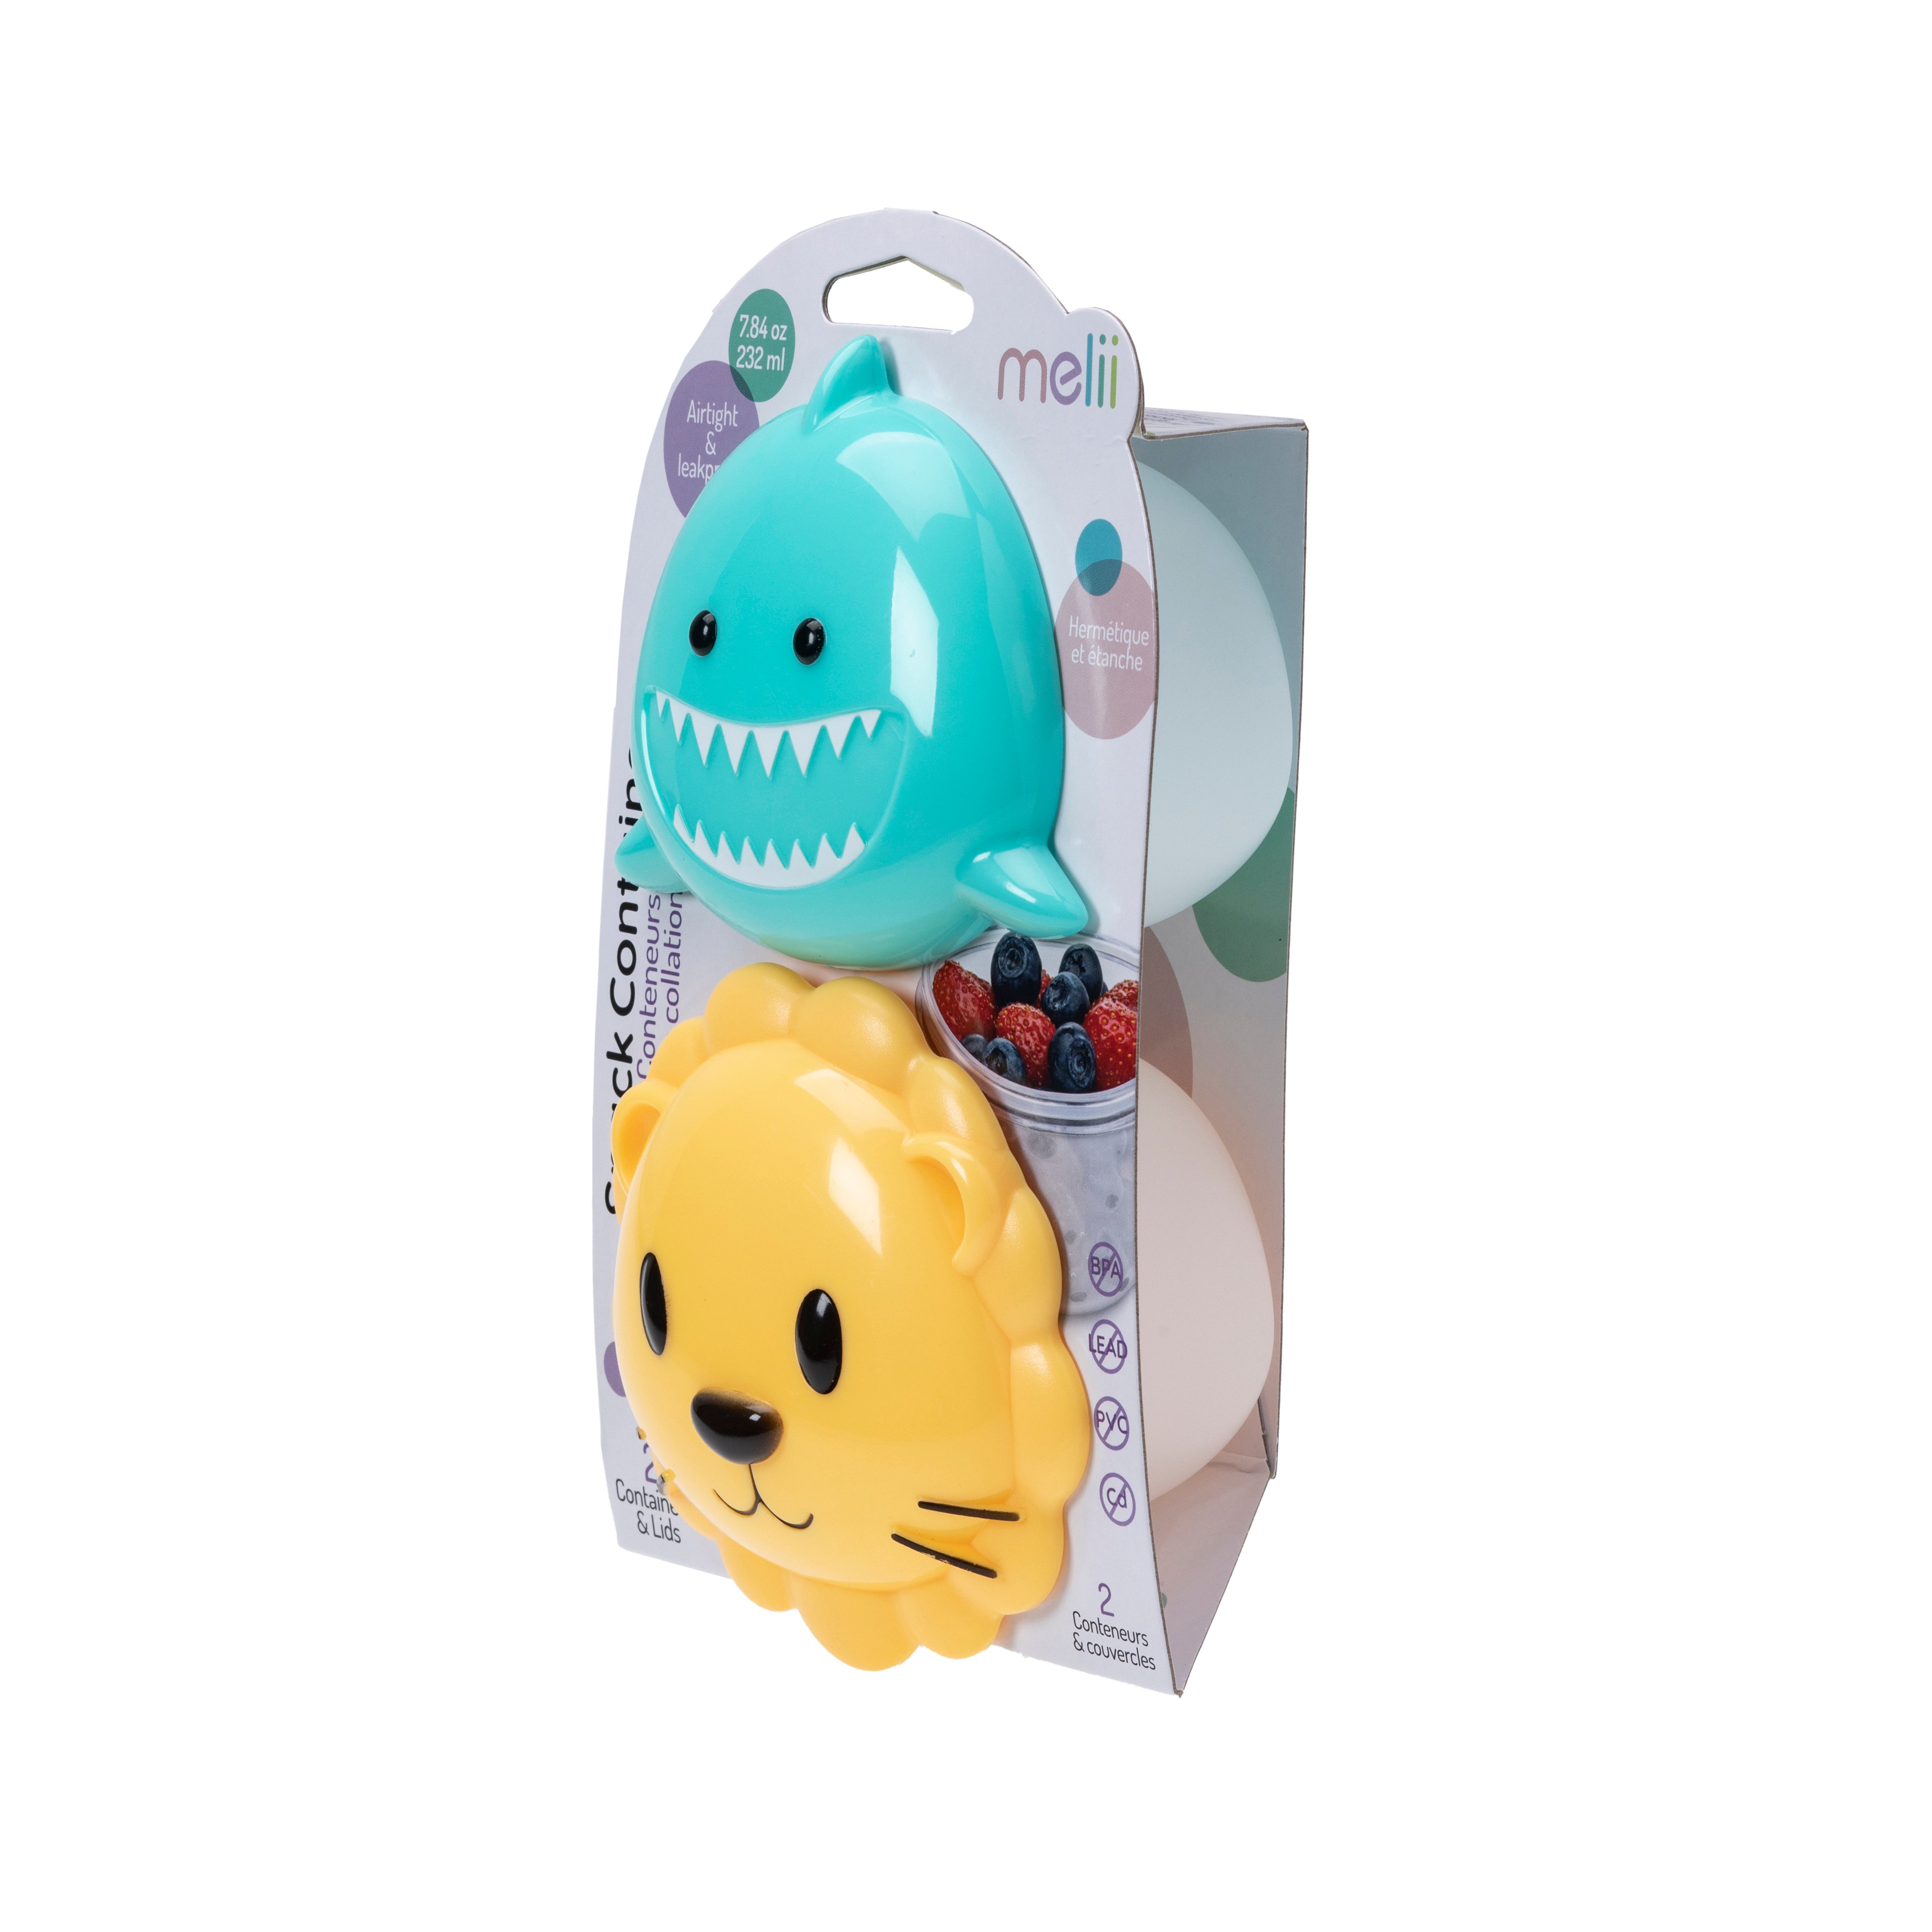 melii-snack-container-shark-lion-2-pack-pp-base